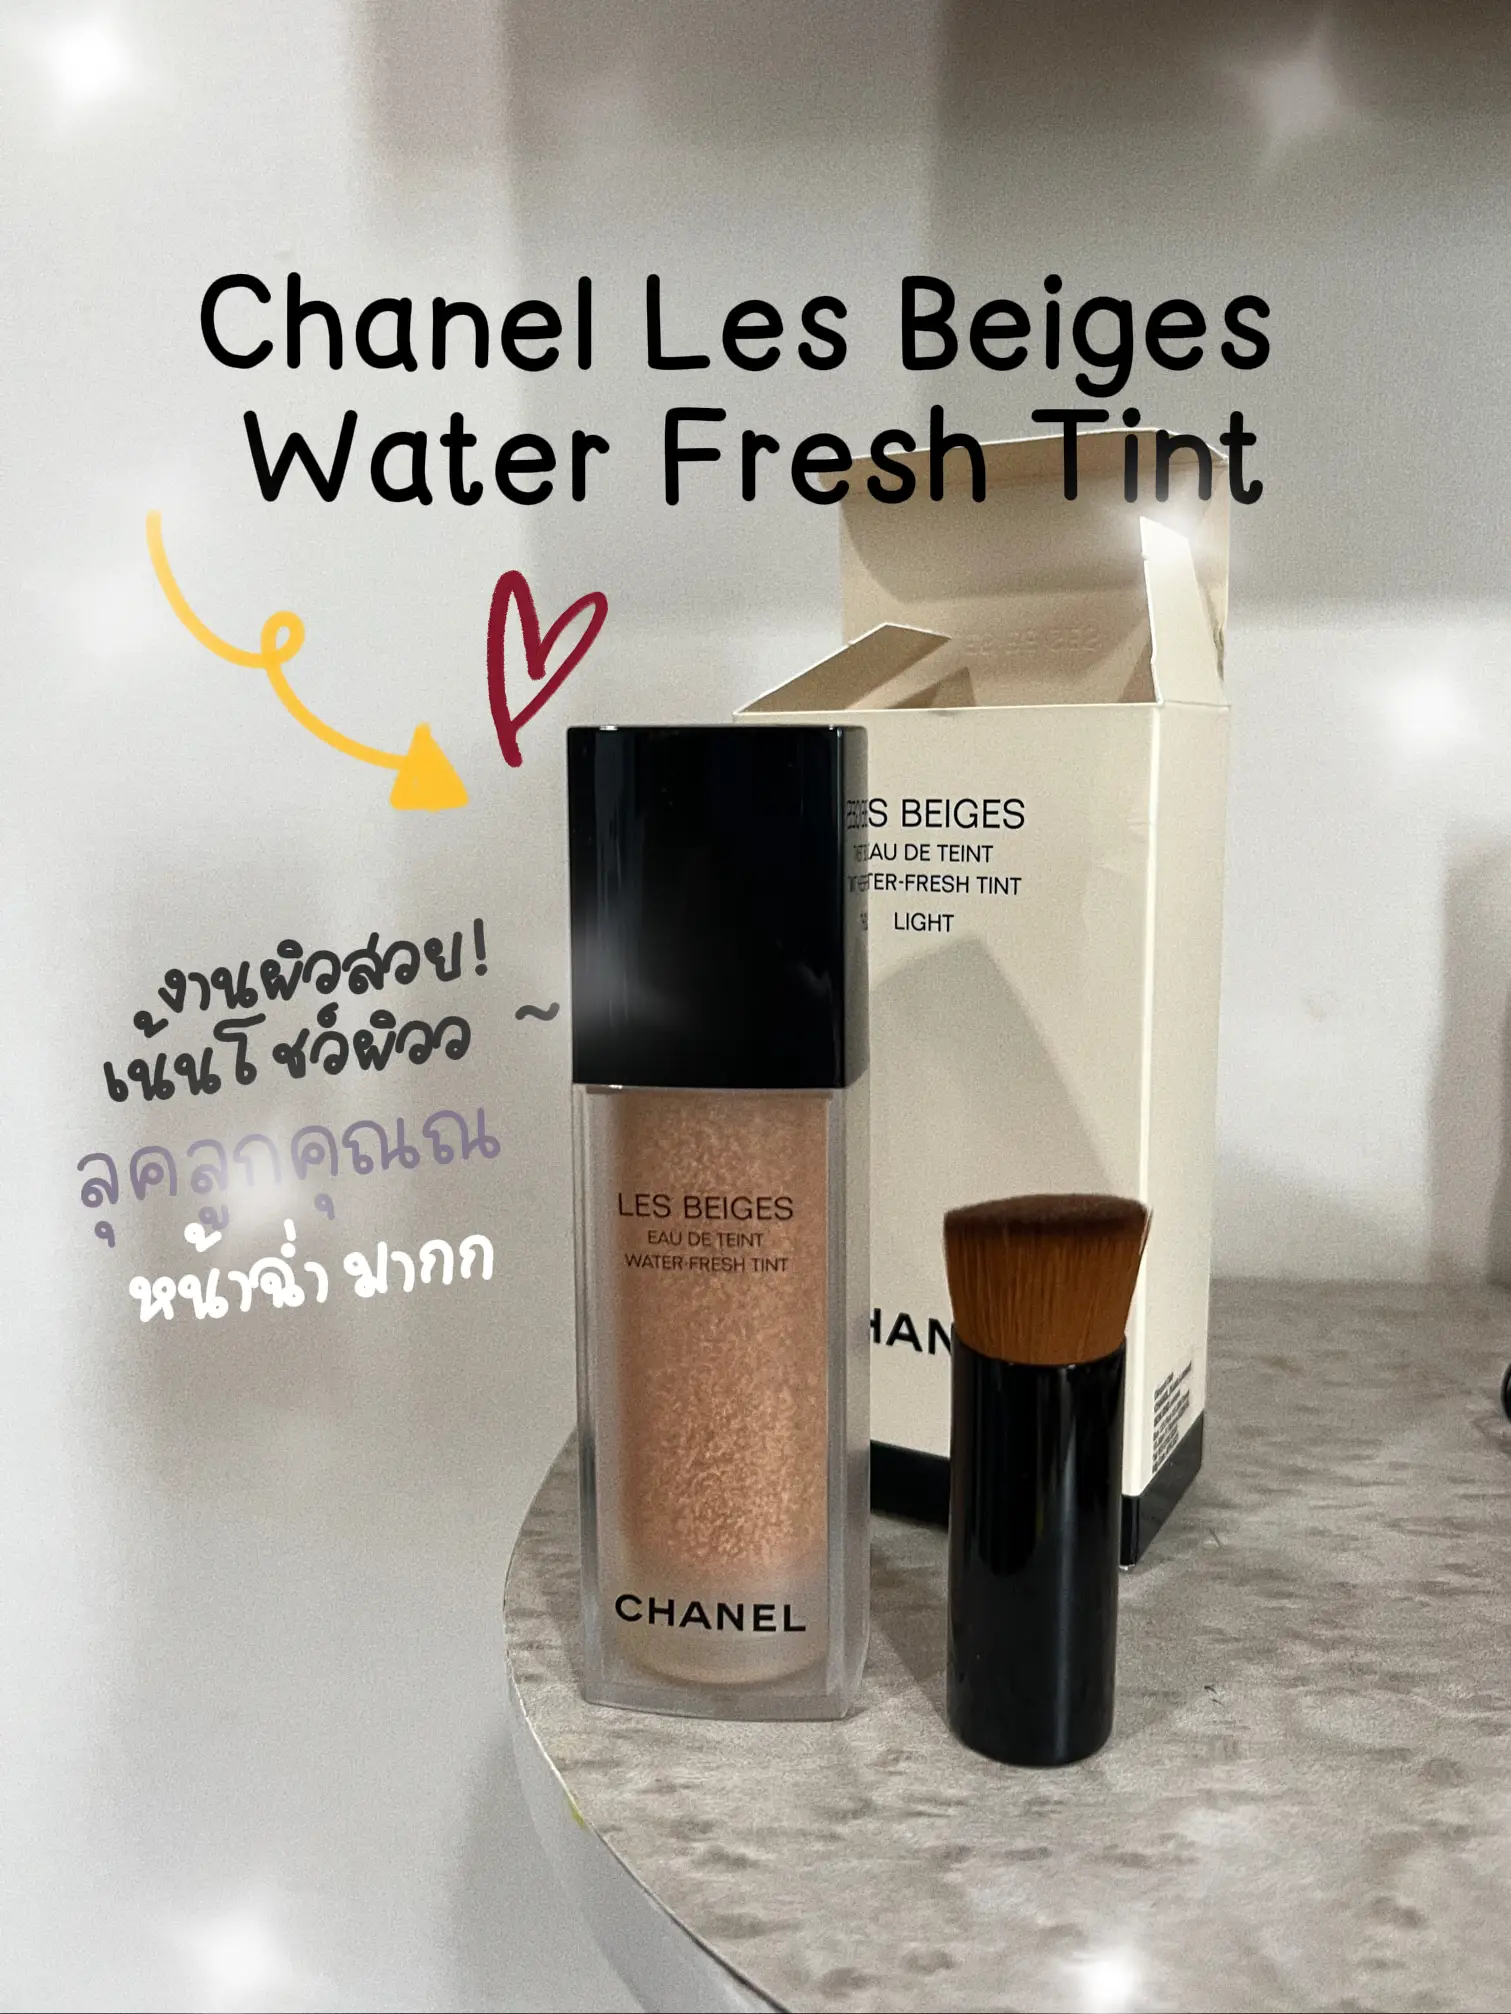 Chanel blush that worth 1 million review! 💗, Gallery posted by Marta